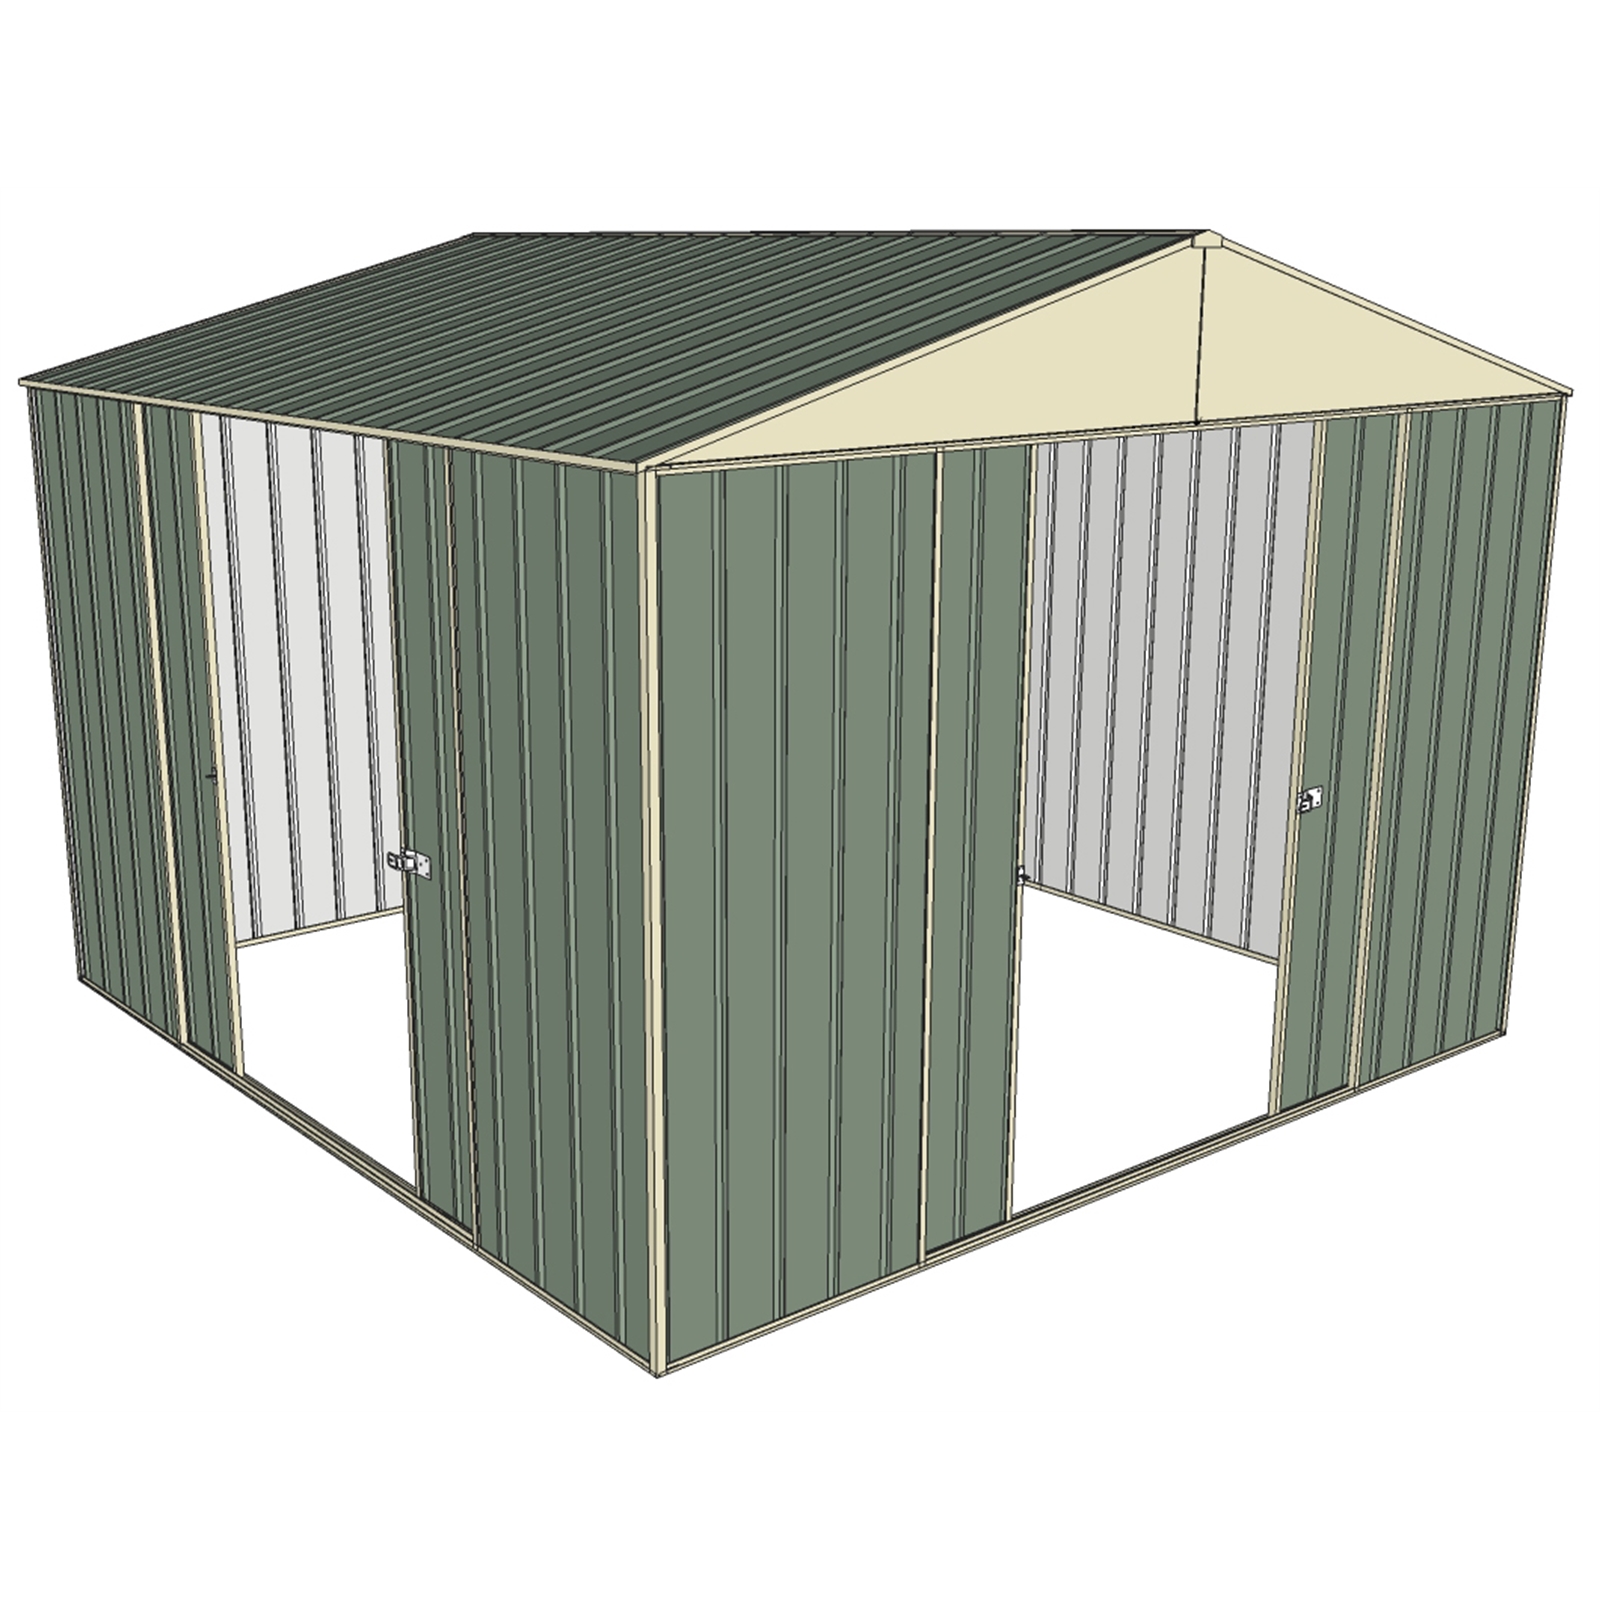 Build-a-Shed 3.0 x 3.0m Green Dual Double Sliding Door Shed